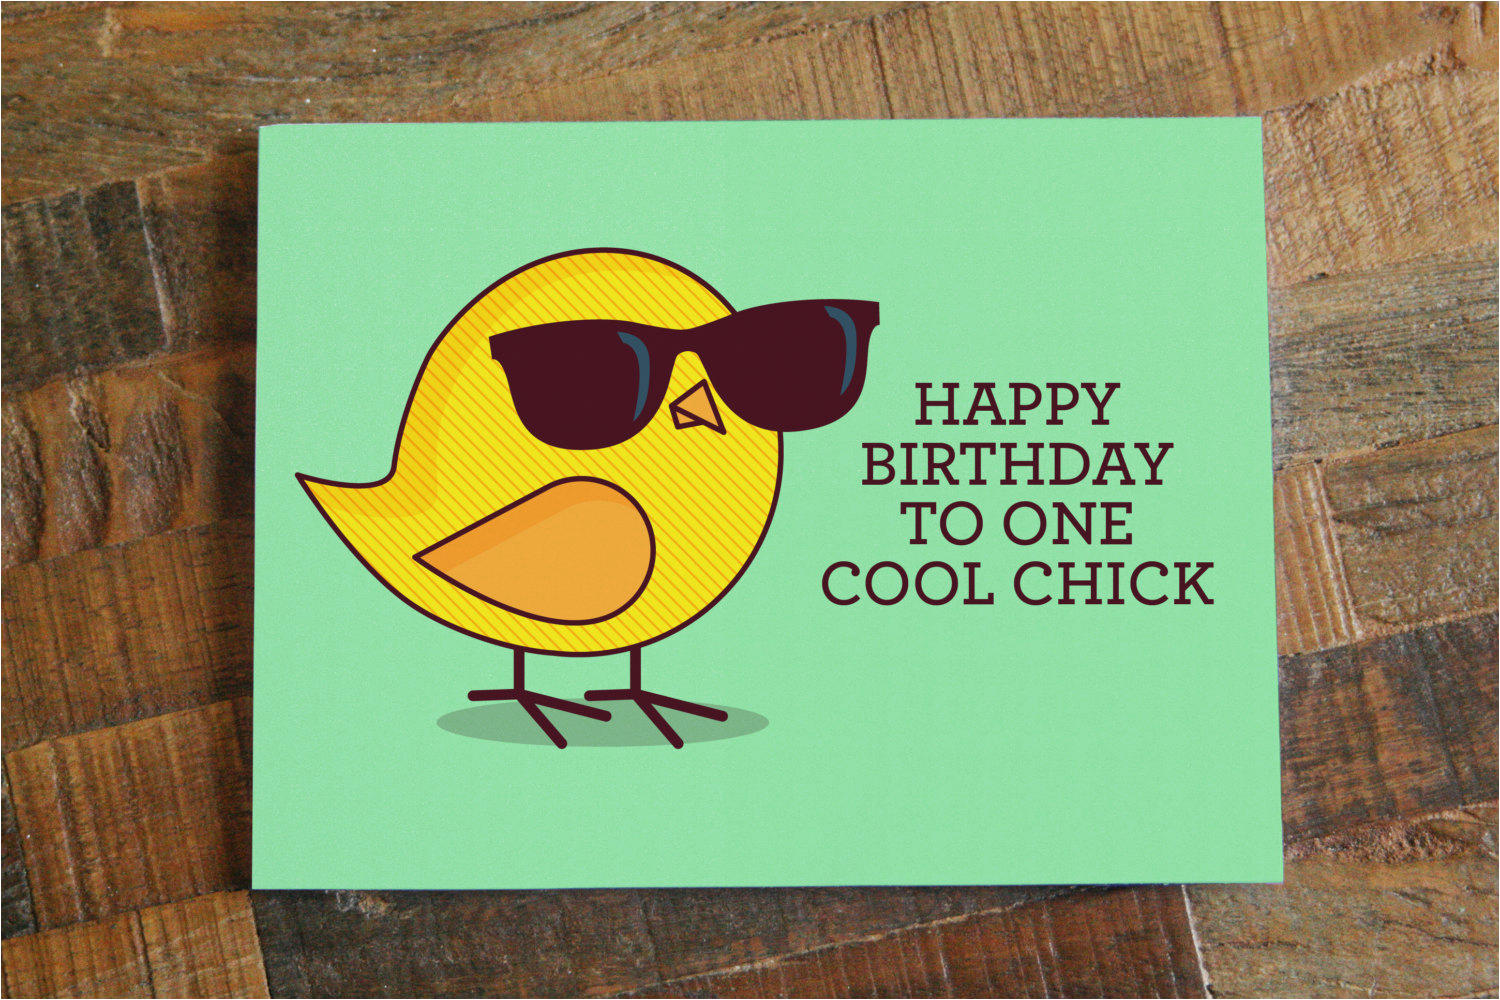 Funny Ideas For Birthday Cards Cool Birthday Cards Online Funny Birthday Card For Her Happy